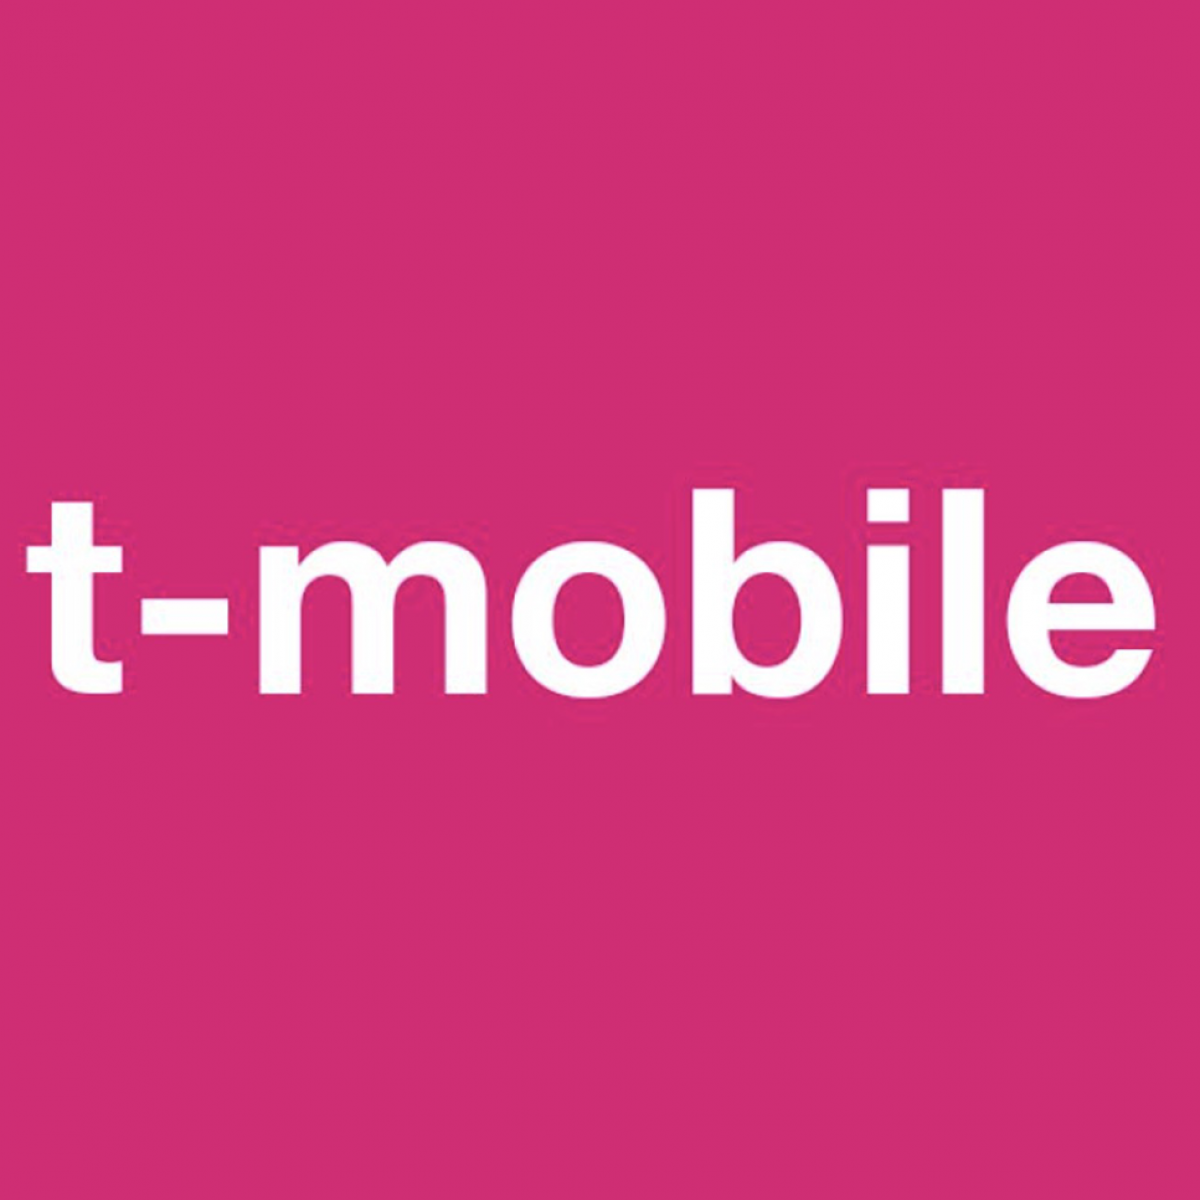 TMobile is giving away a free year of MLBTV for the next week